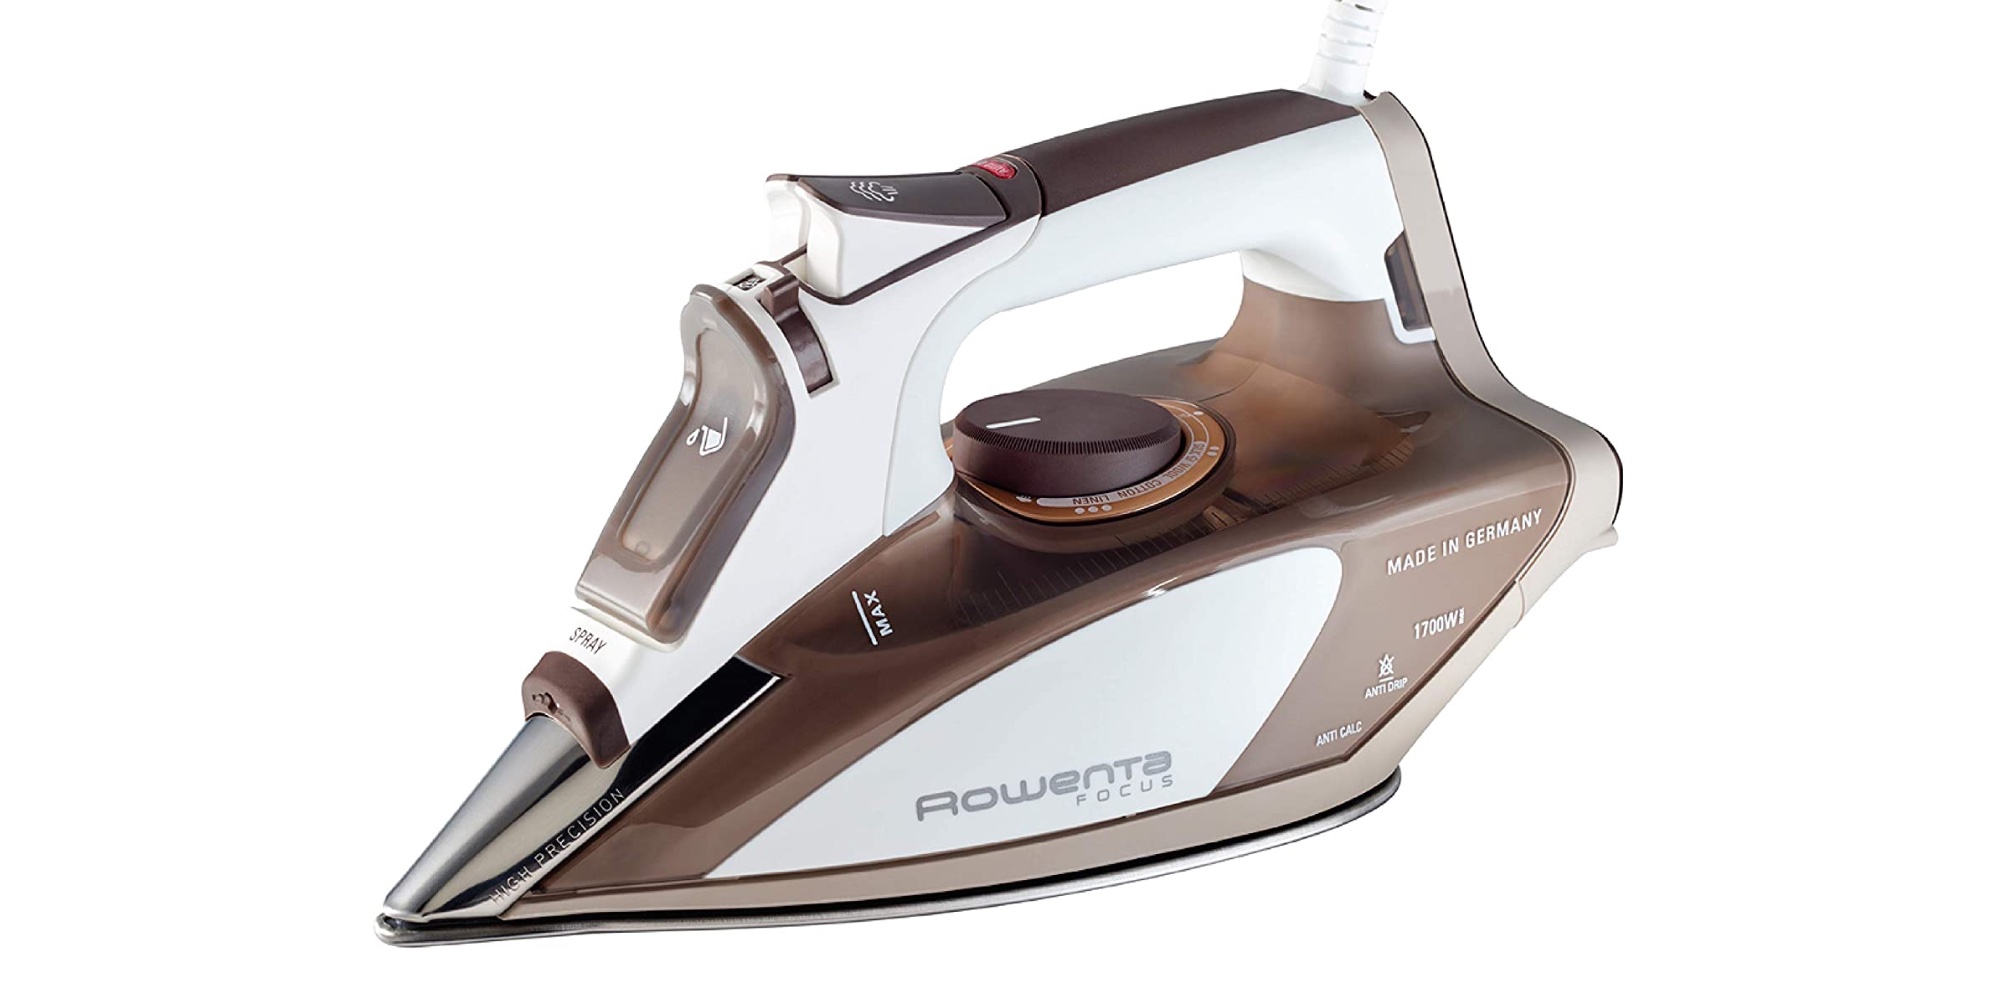 Save up to 38% on Rowenta irons and other home appliances priced from $32